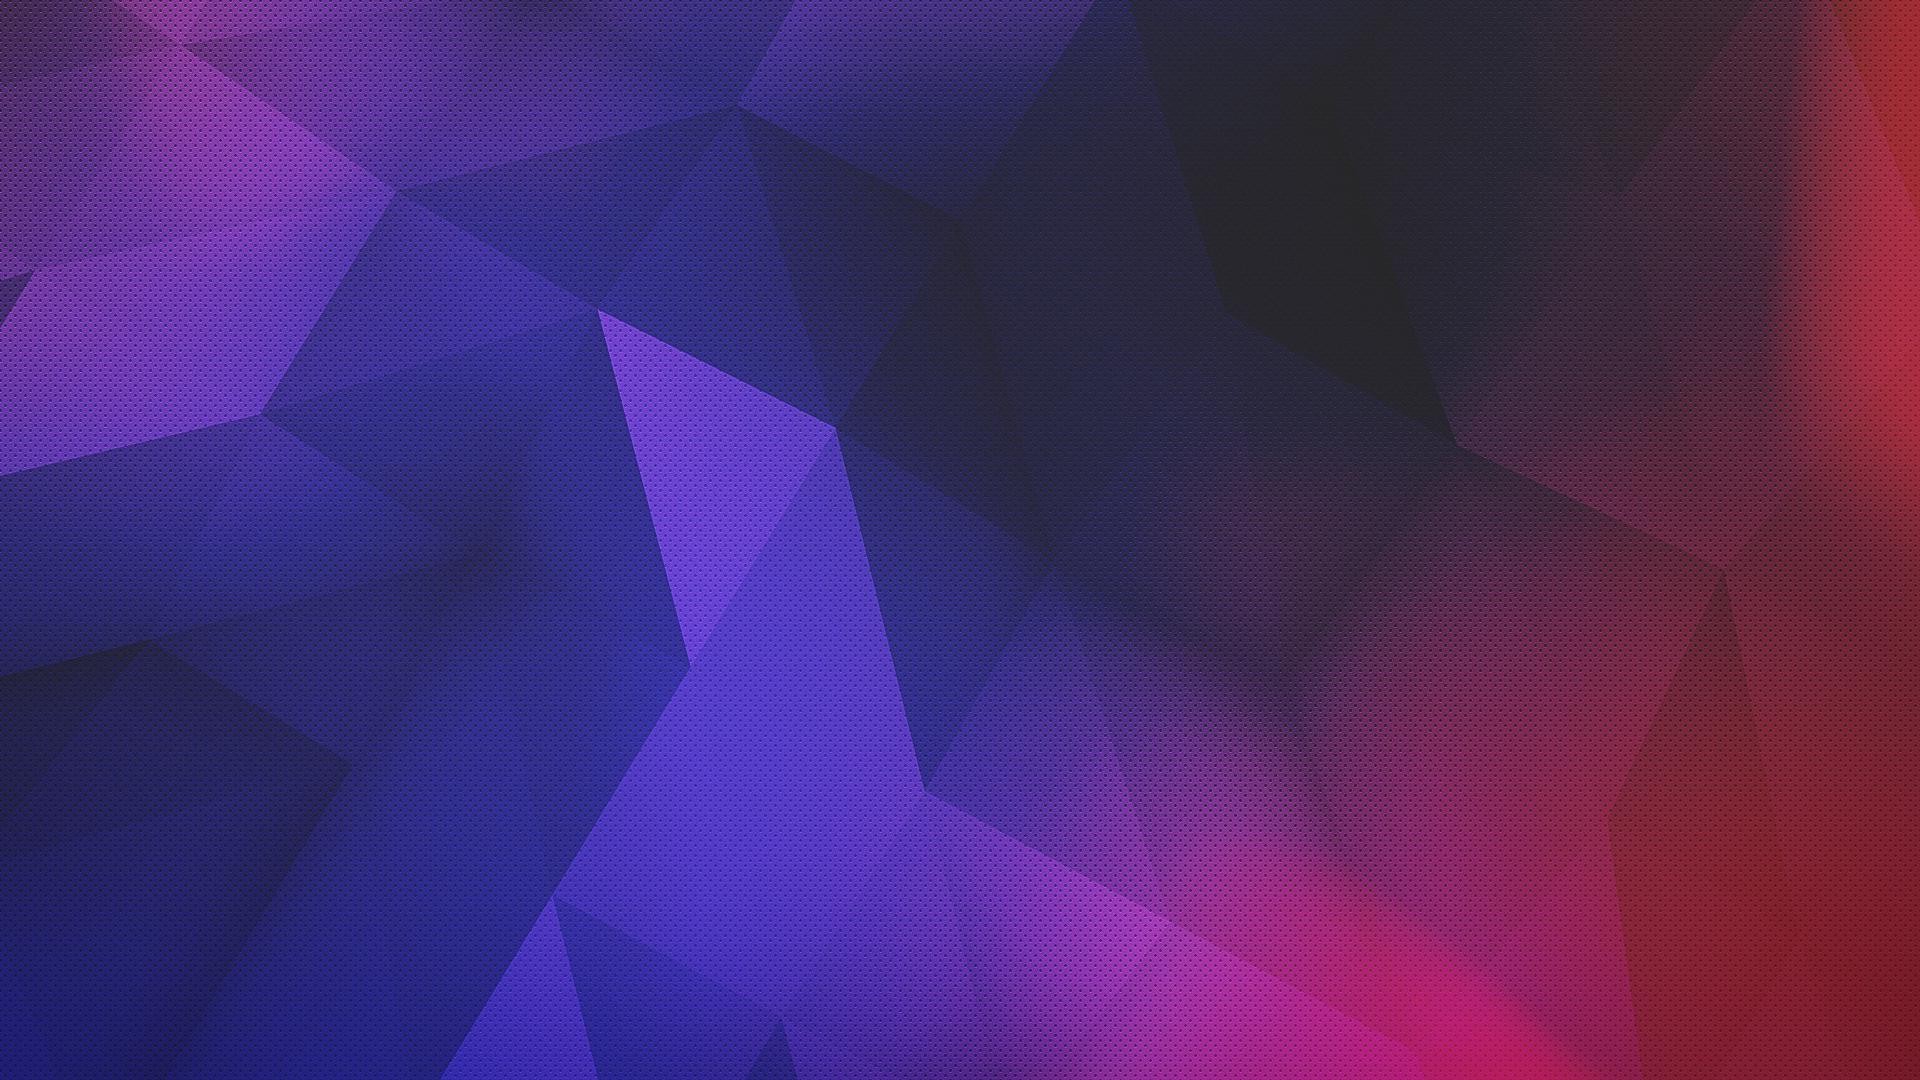 abstract, Red, Purple, Blue, Low Poly, Digital Art, Artwork Wallpaper